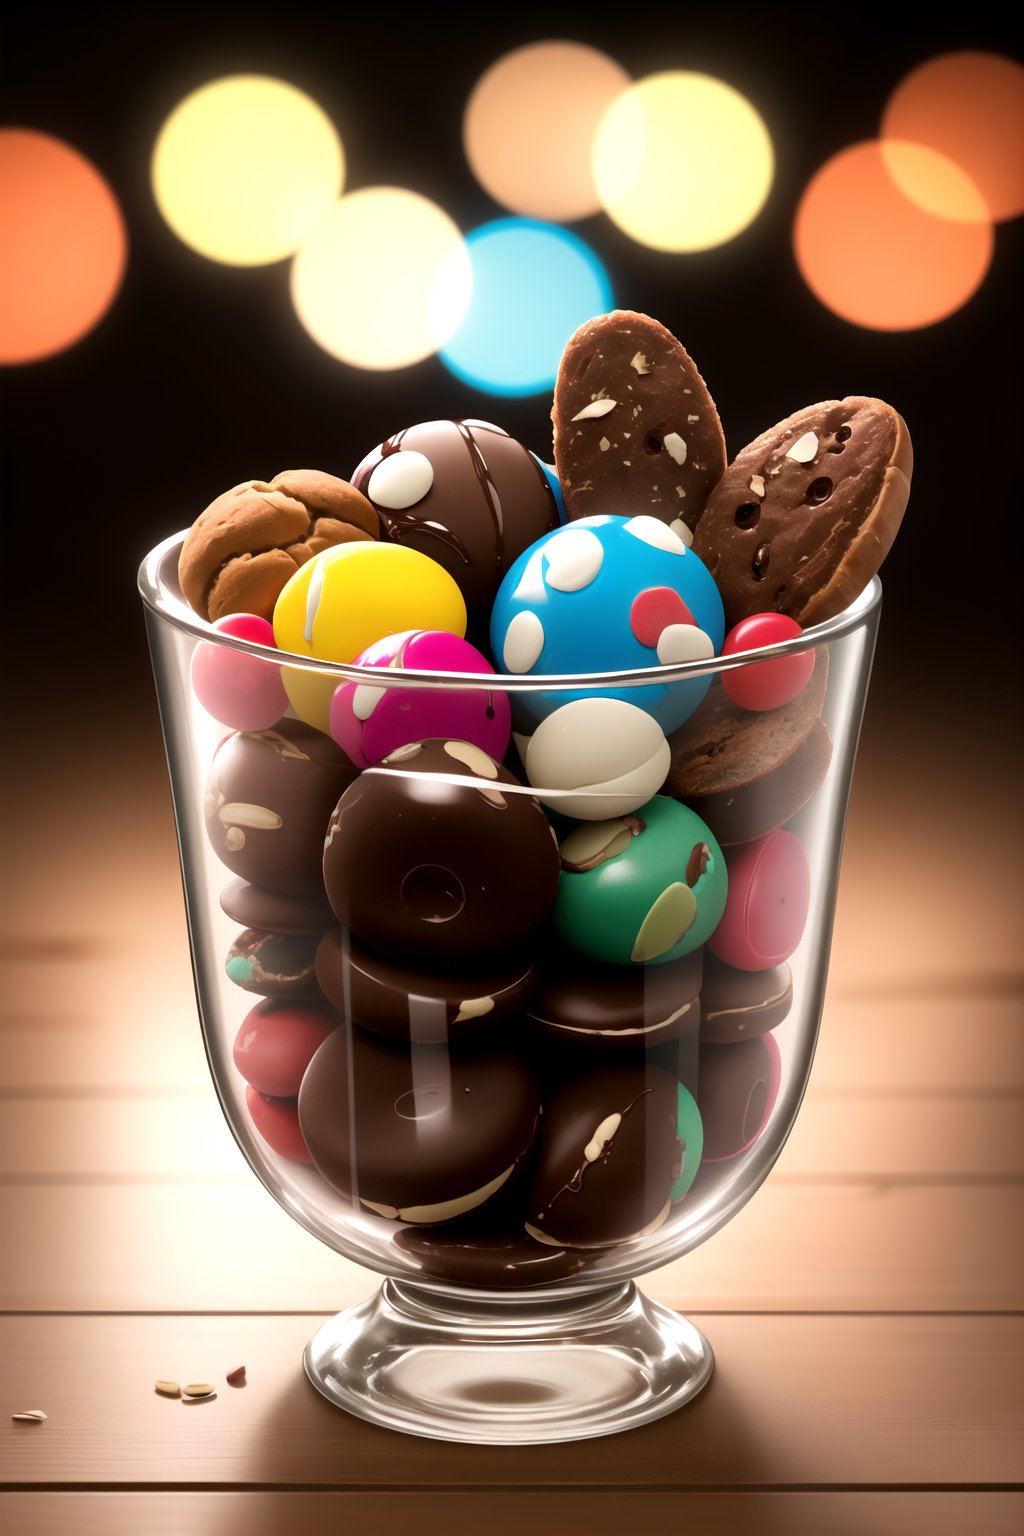 centered, photography, | multiple glass bowl, chocolate balls, candies, cookies, bread, almonds, peanuts, delicious, symetrical, realistic, | bokeh, depth of field, | gamer bar, gamer decoration, rgb lights